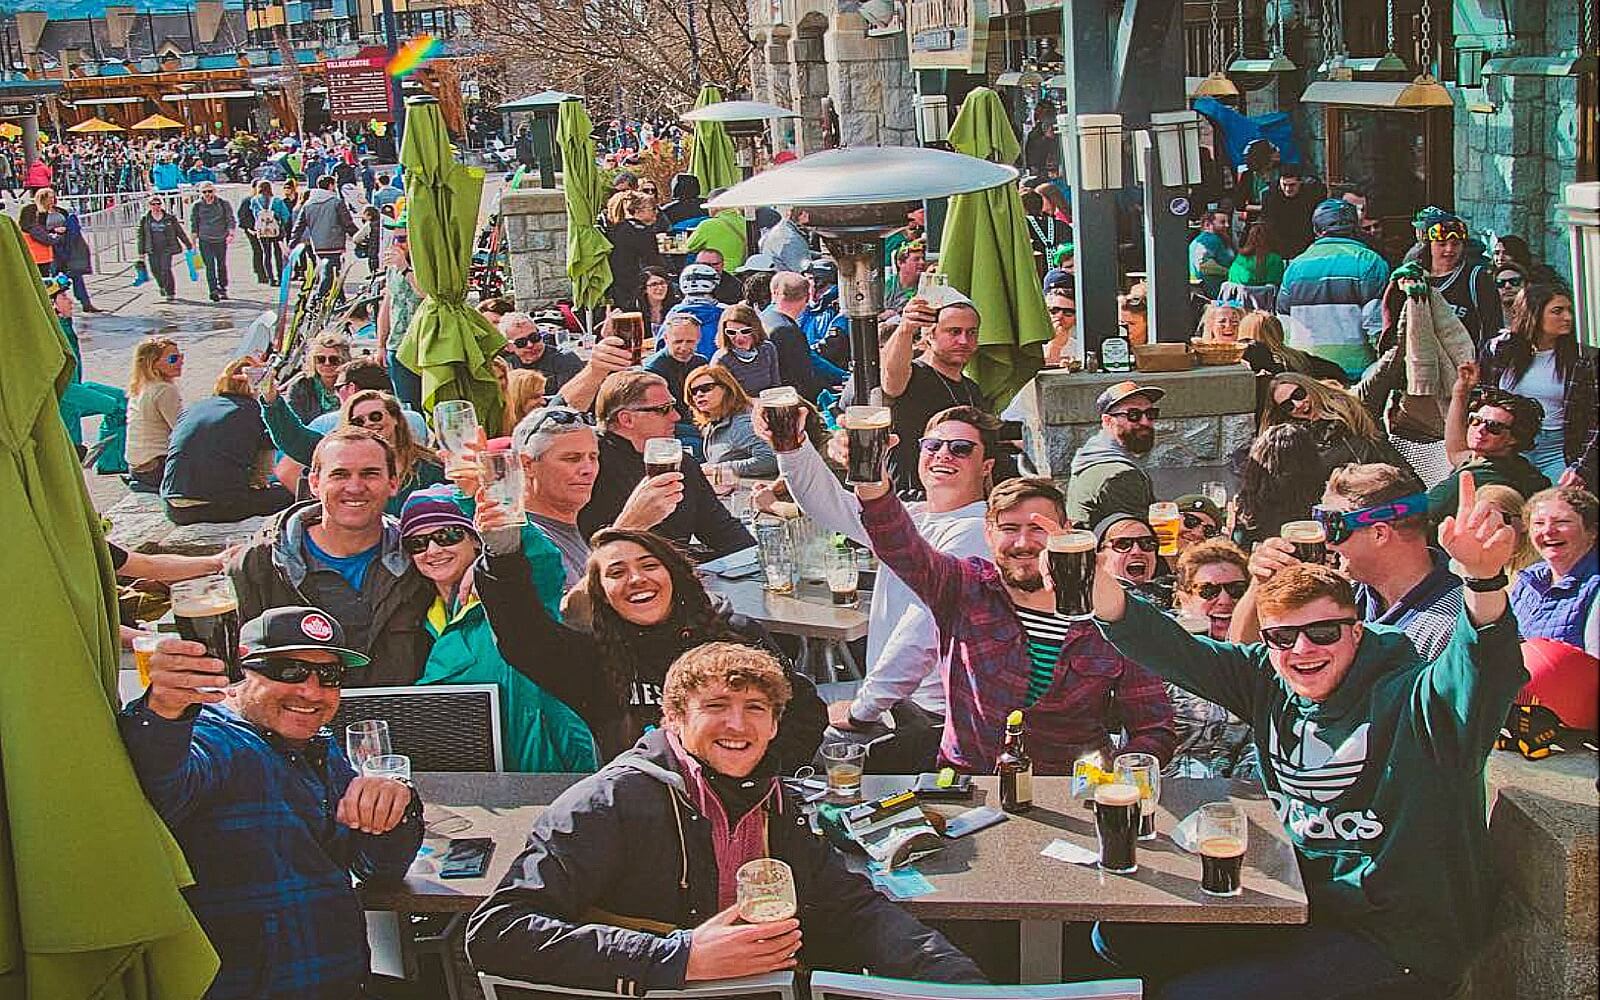 A crowd drinks on the patio at Dubh Linn Gate, Whistler